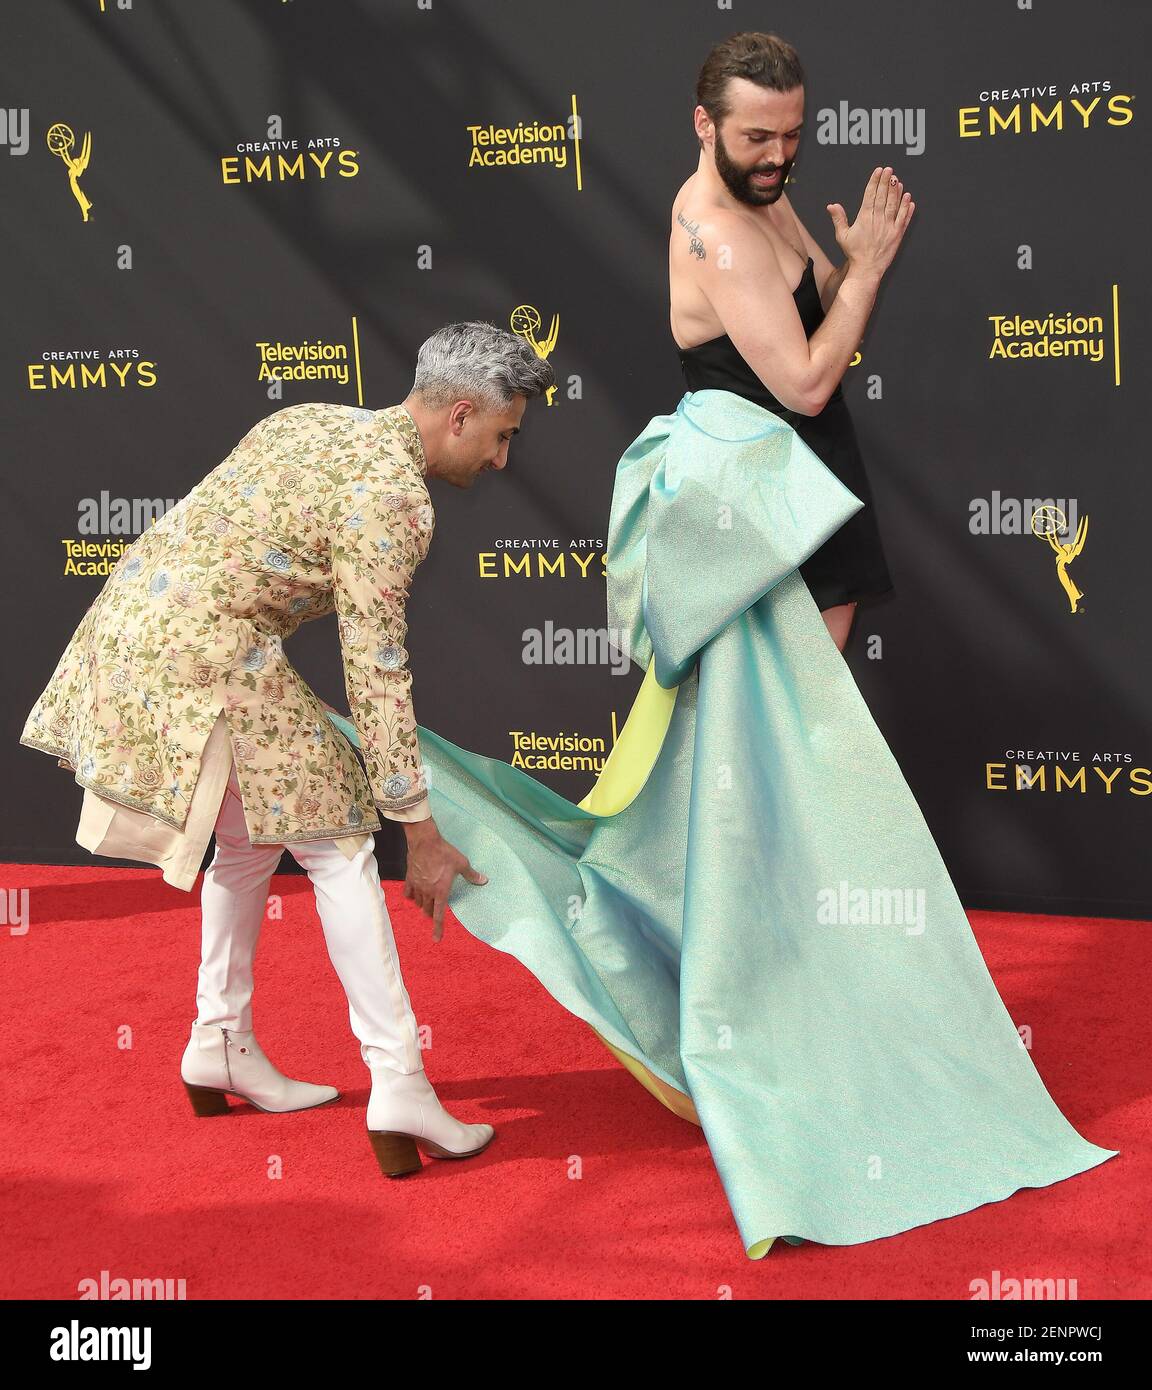 L-R) Tan France fixes Jonathan Van Ness' dress at the 2019 Creative Arts  Emmy Awards - Day 1 held at the Microsoft Theater in Los Angeles,, CA on  Saturday, September 14, 2019. (